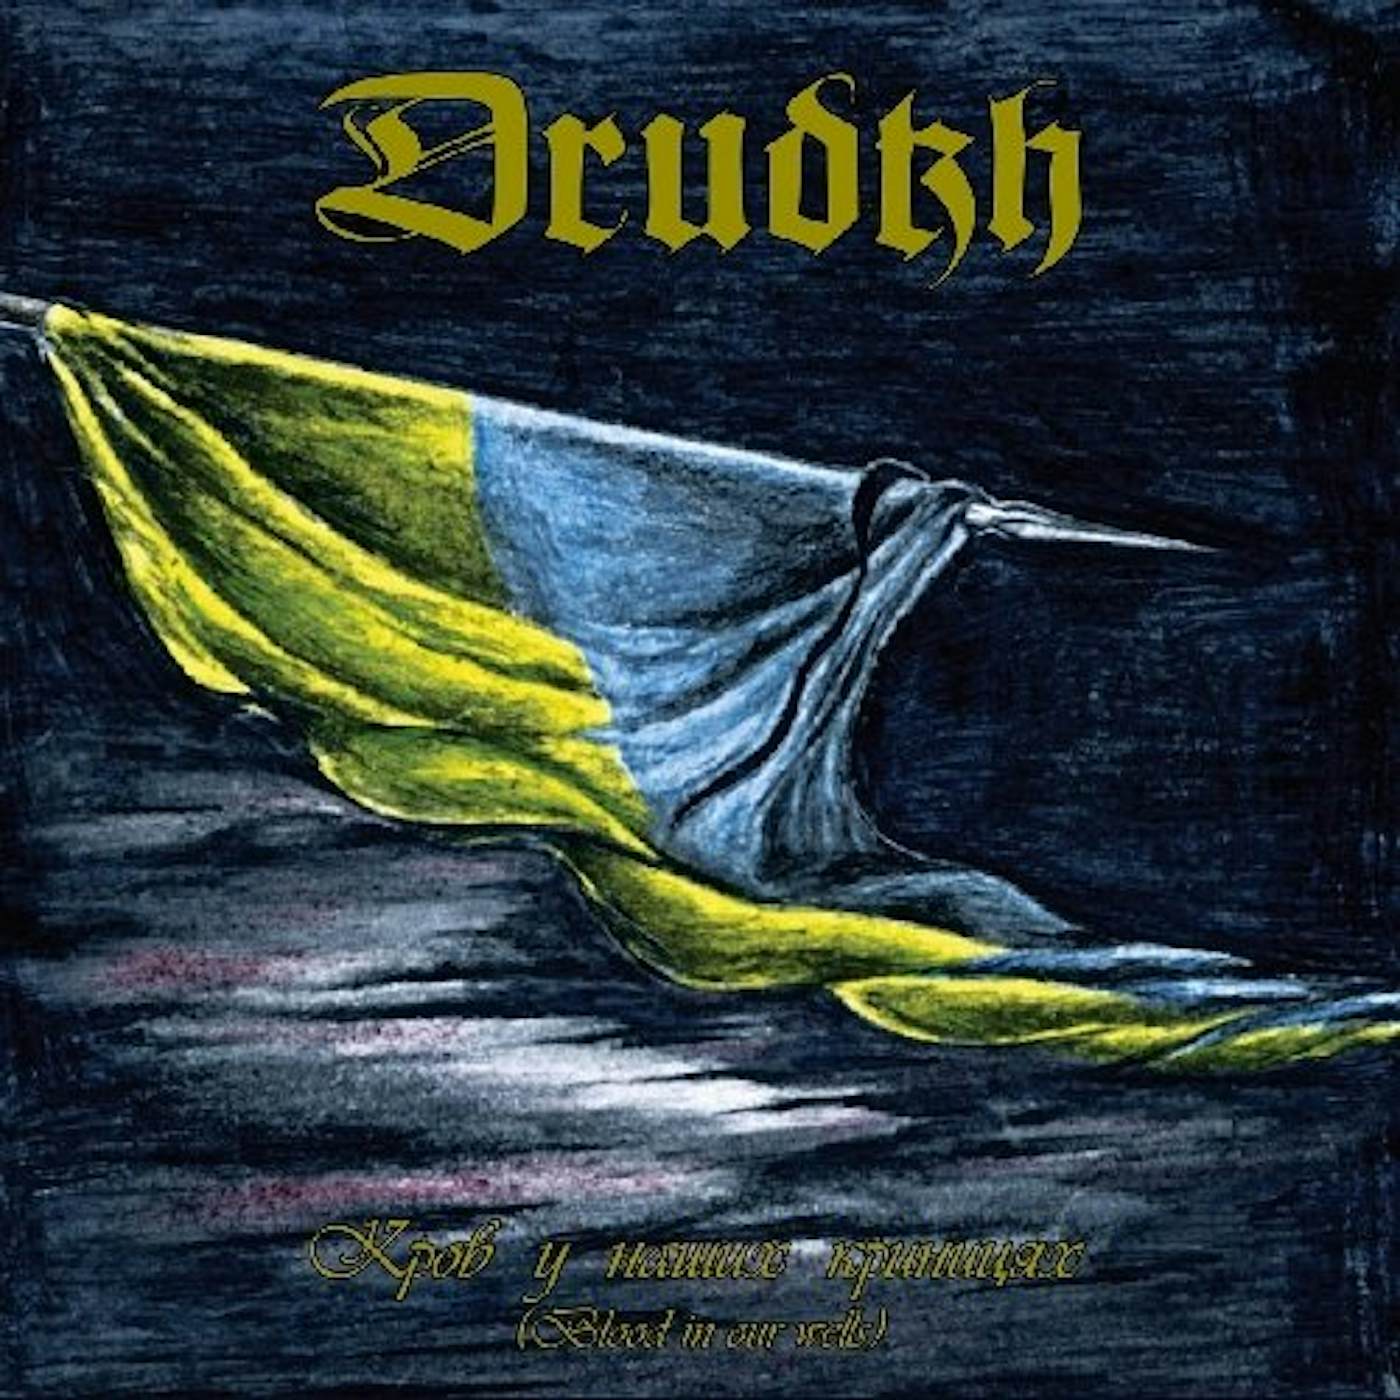 Drudkh Blood in Our Wells Vinyl Record